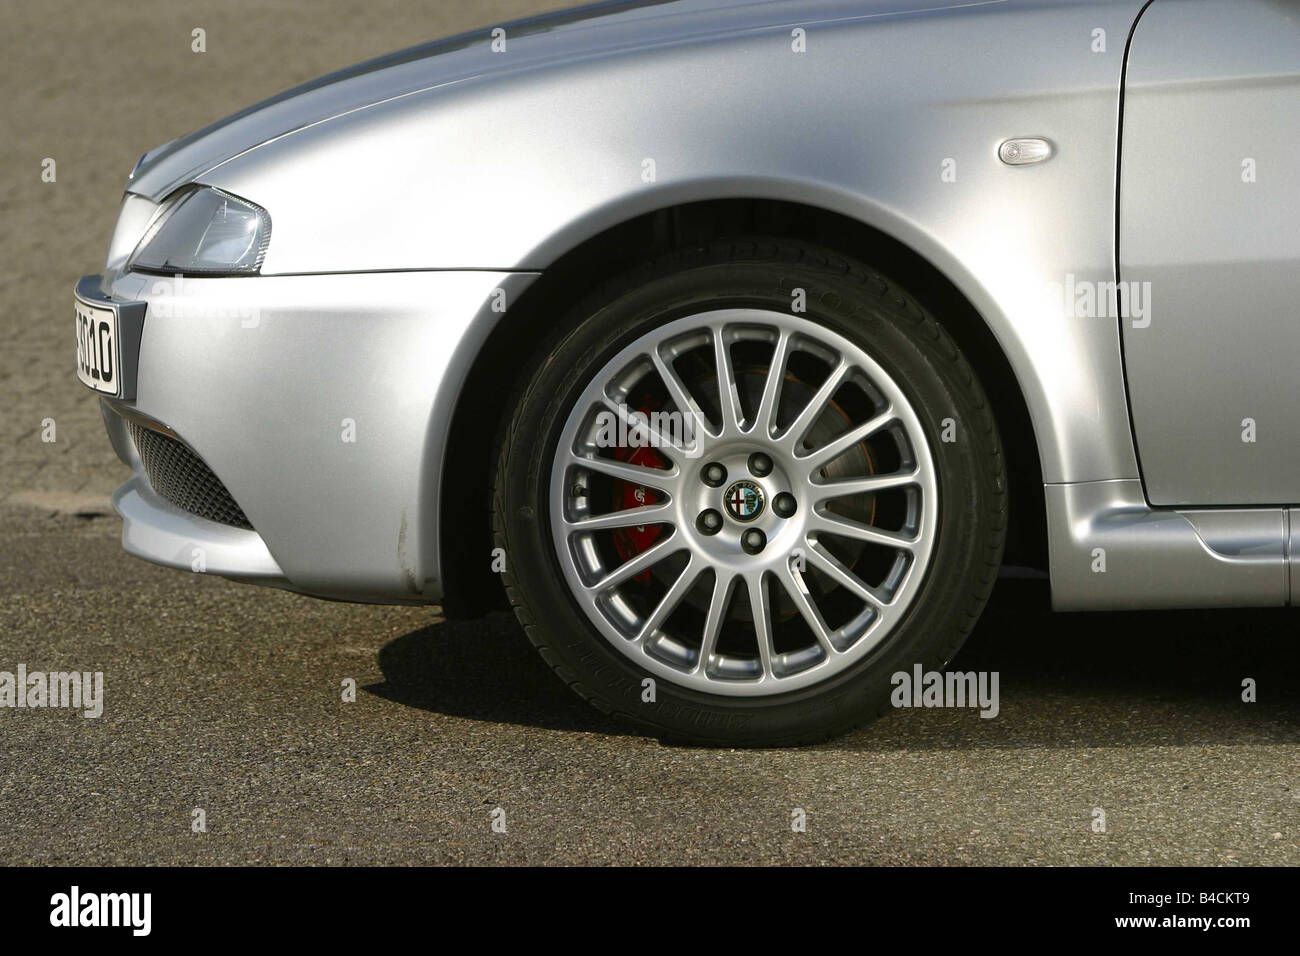 Car, Alfa Romeo 147 GTA, Limousine, model year 2000-, silver, Lower middle-sized class, Detailed view, tyre, Wheel, Front tyres, Stock Photo